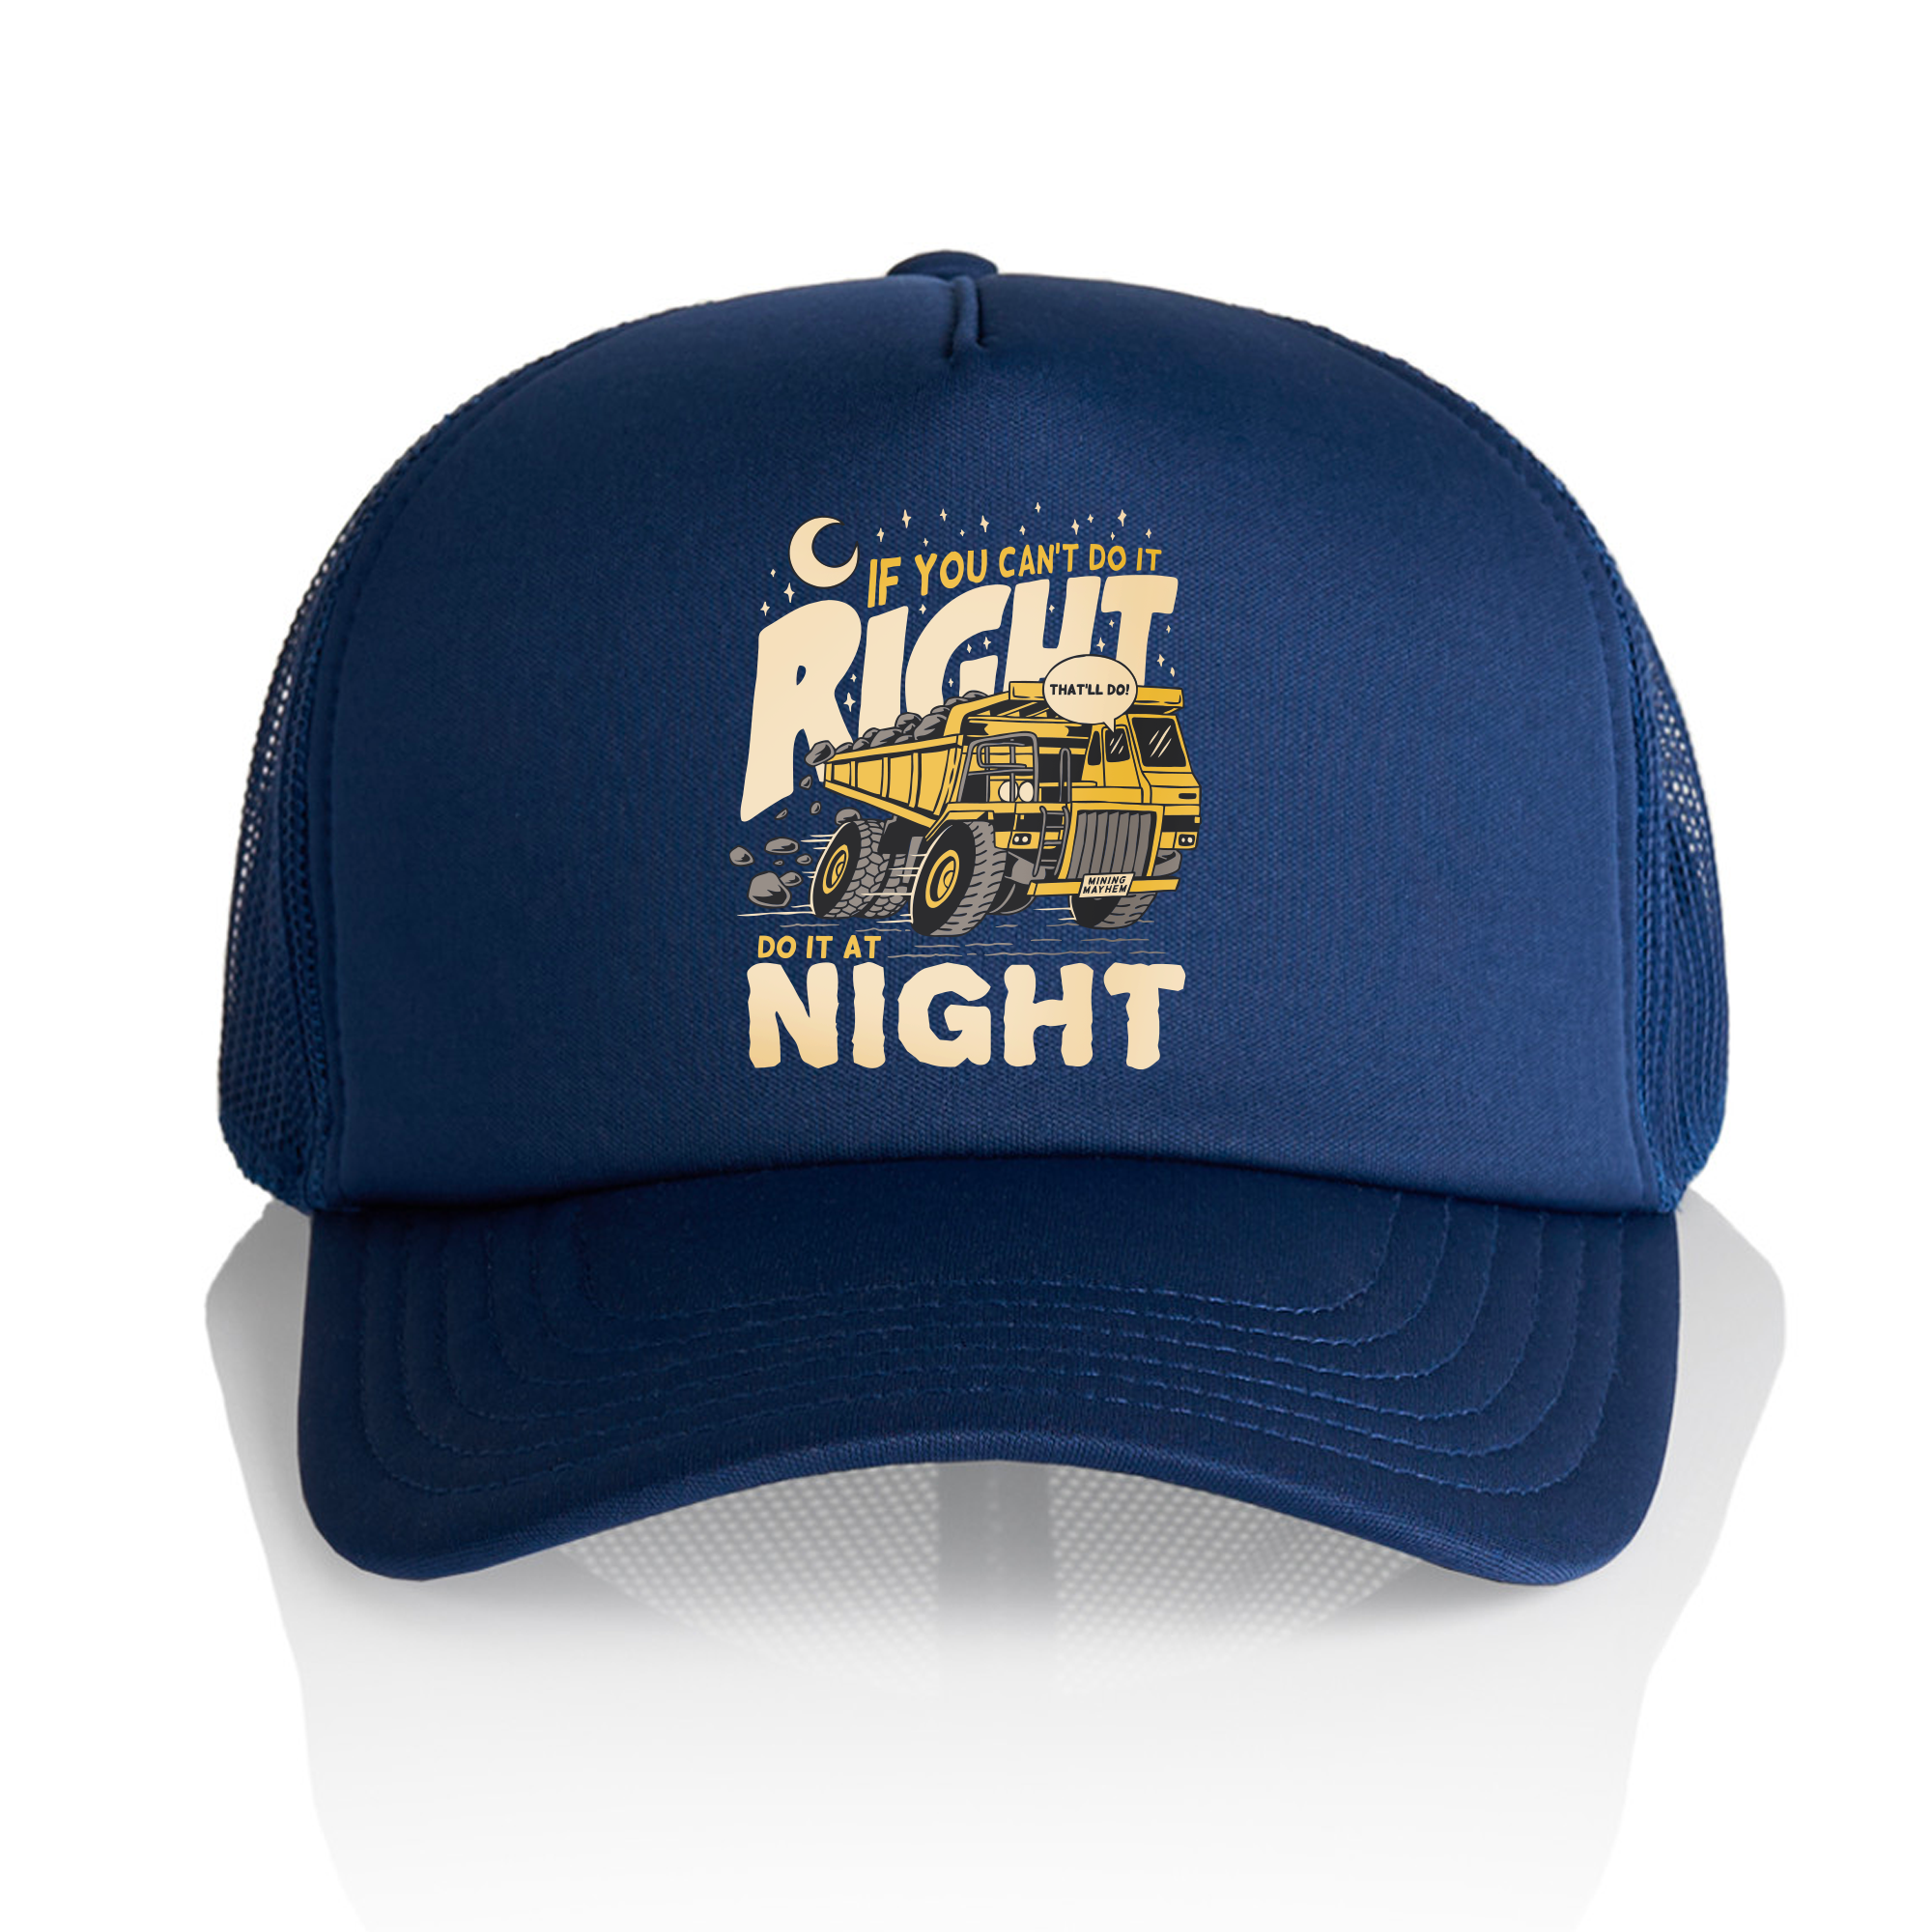 If You Can't Do It Right, Do It At Night - Full Colour Trucker Caps (Navy)